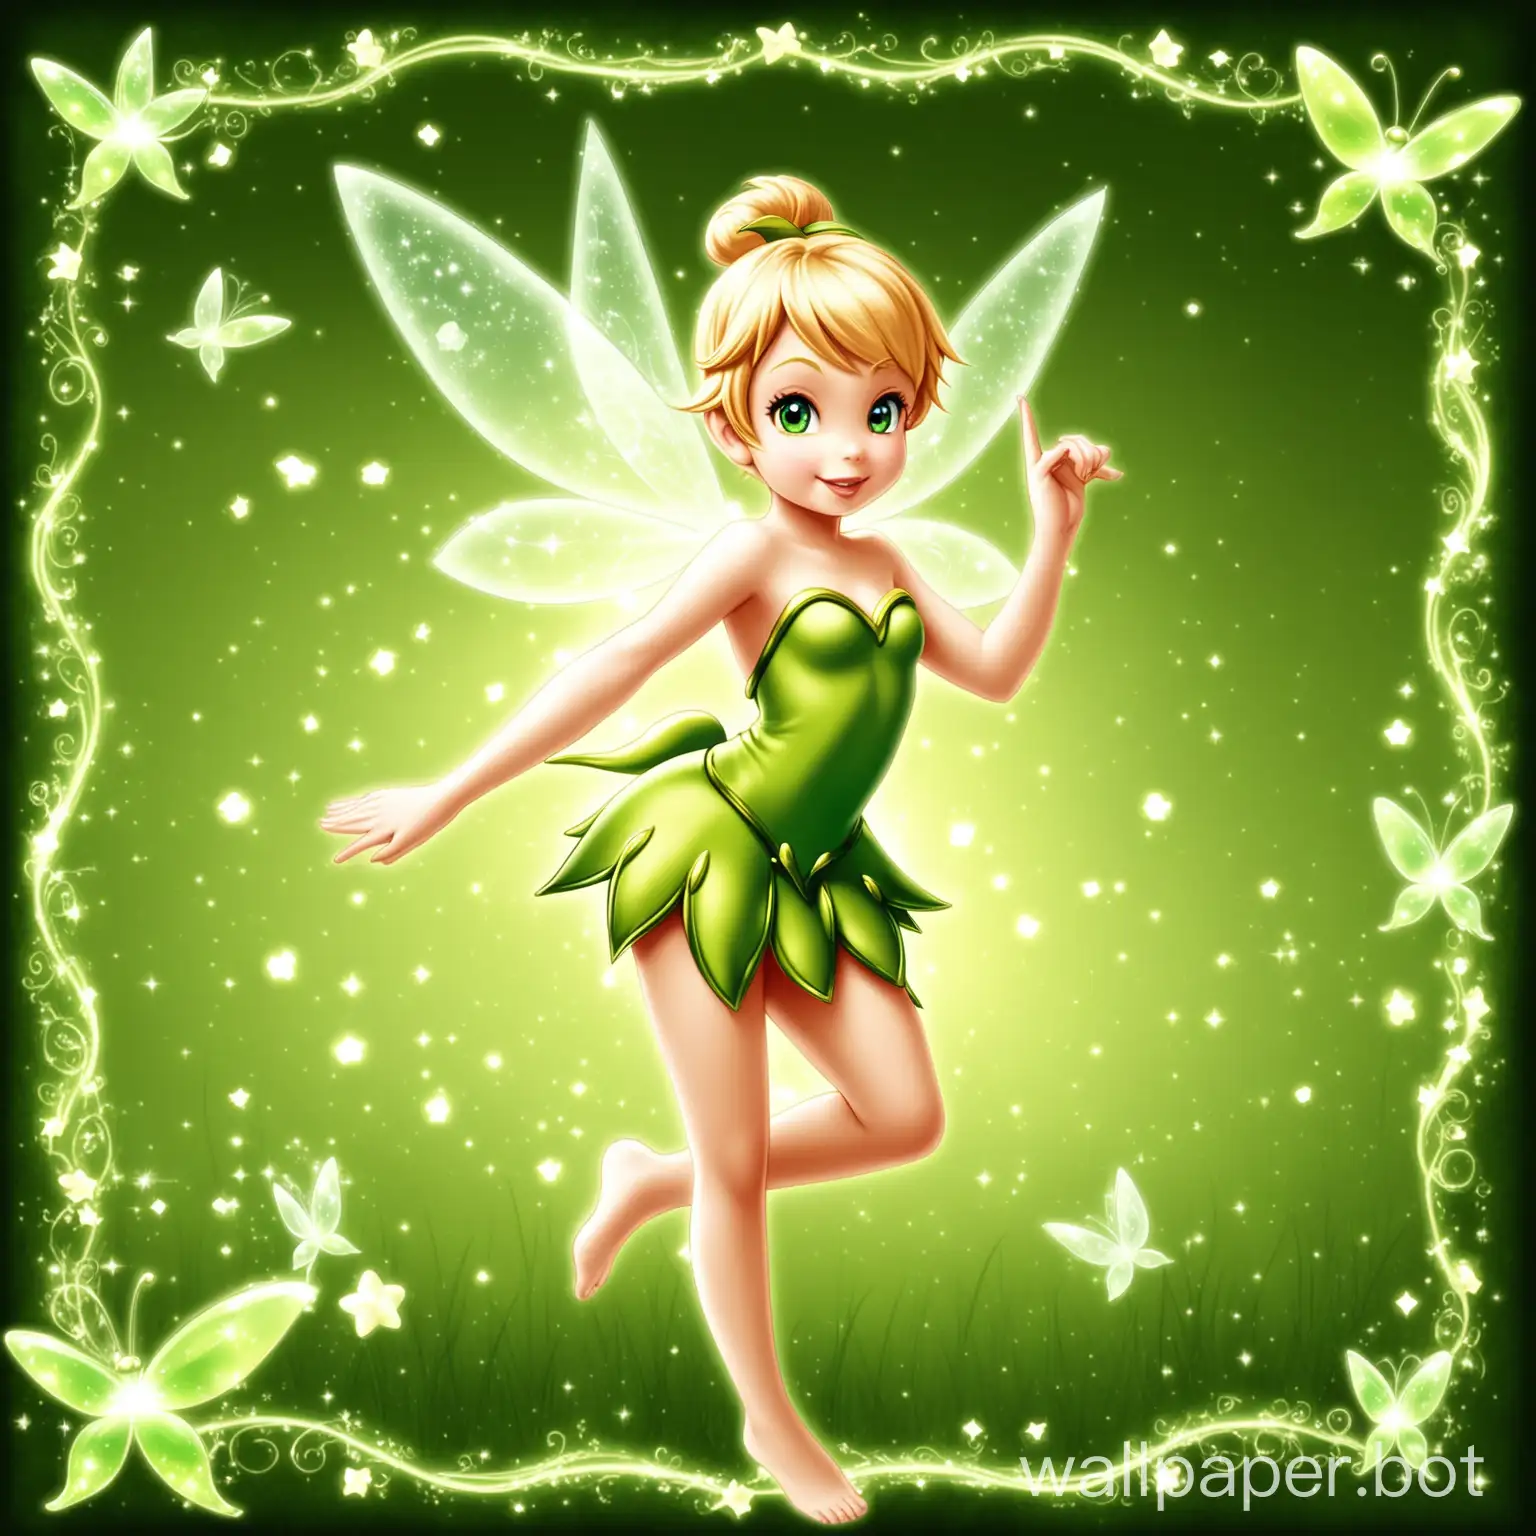 Tinker Bell photo size 100 x 100 photo type tgs